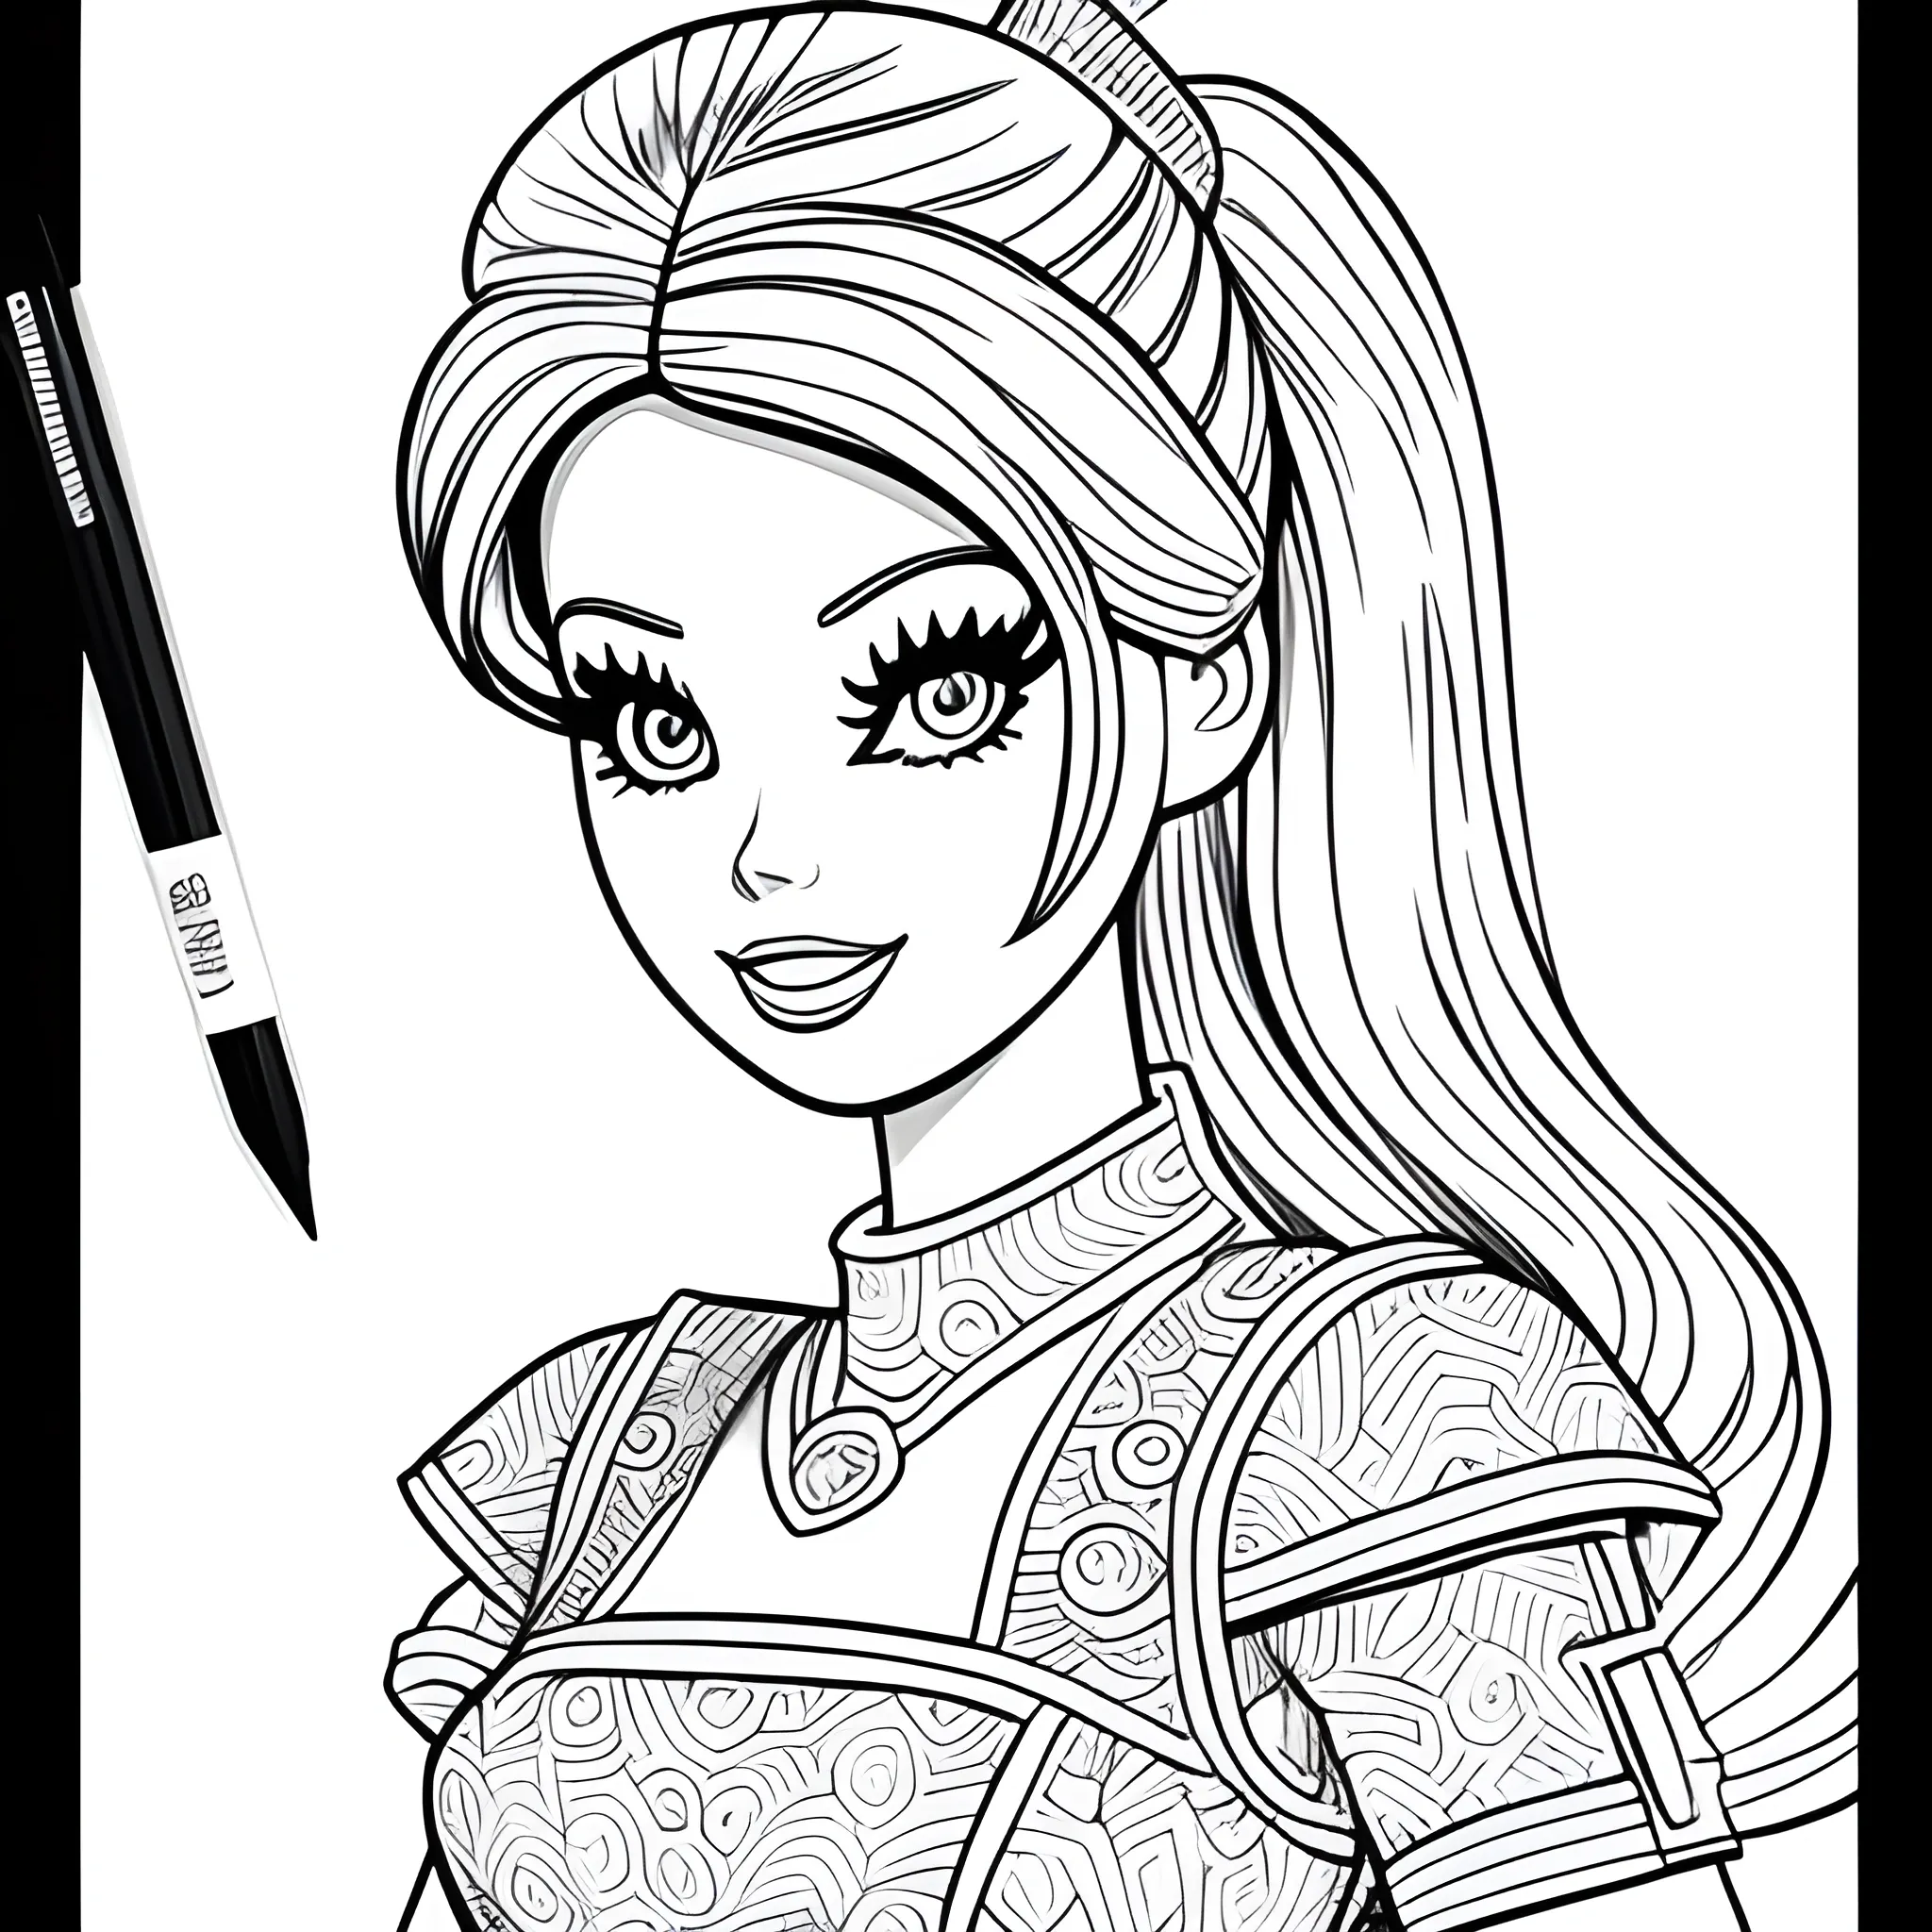 Barbie  in coloring book style, black and white, , Pencil Sketch